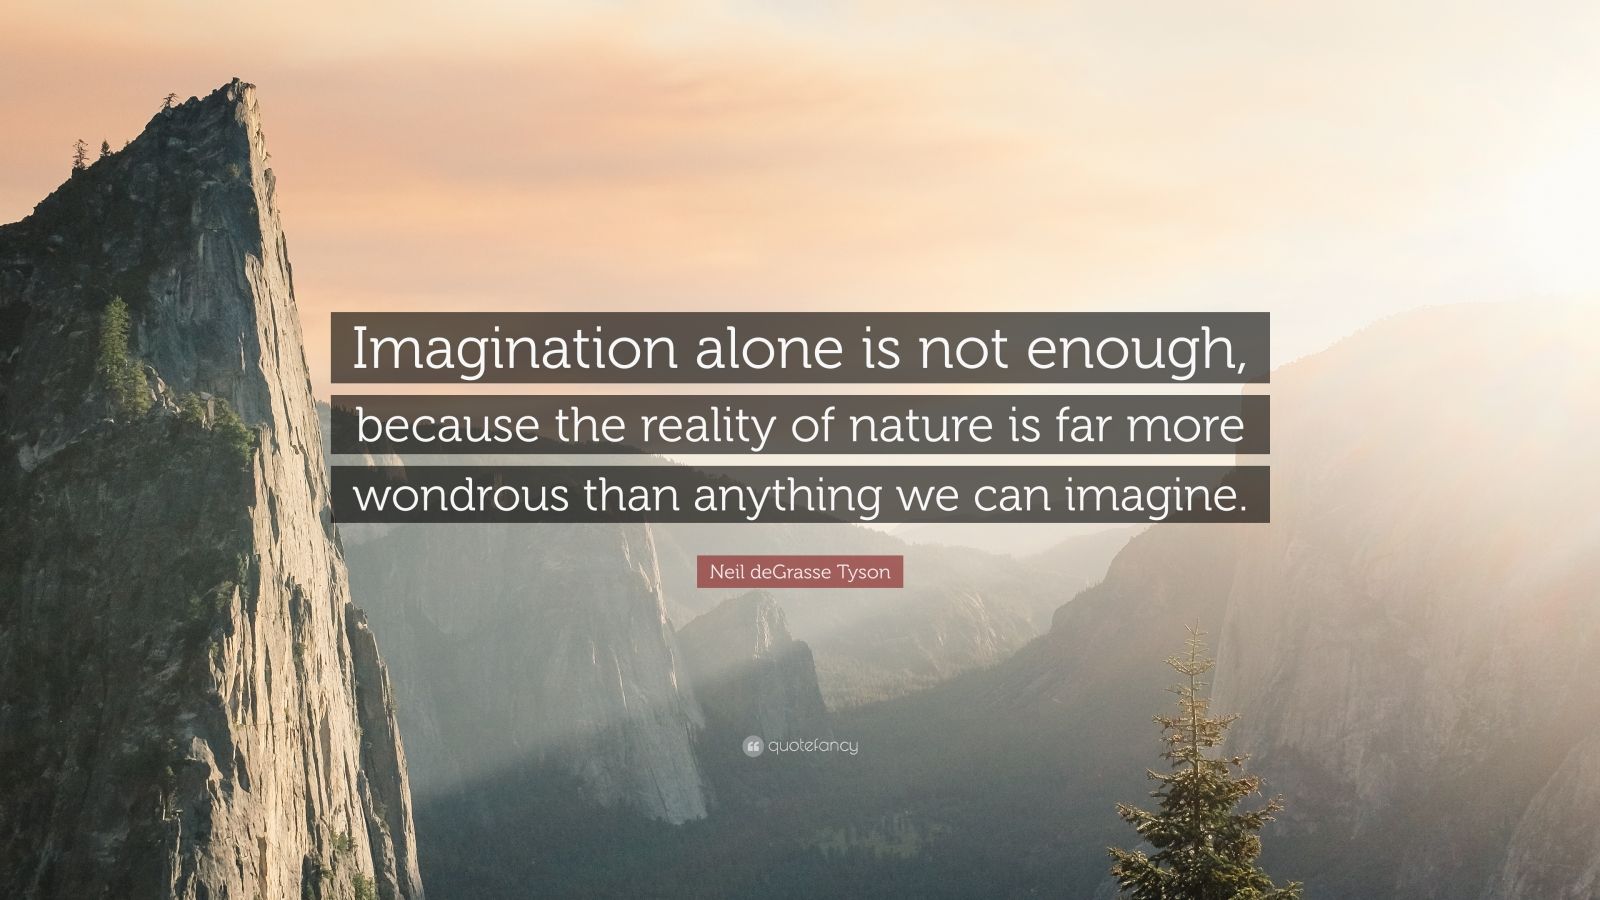 4792343-Neil-deGrasse-Tyson-Quote-Imagination-alone-is-not-enough-because.jpg